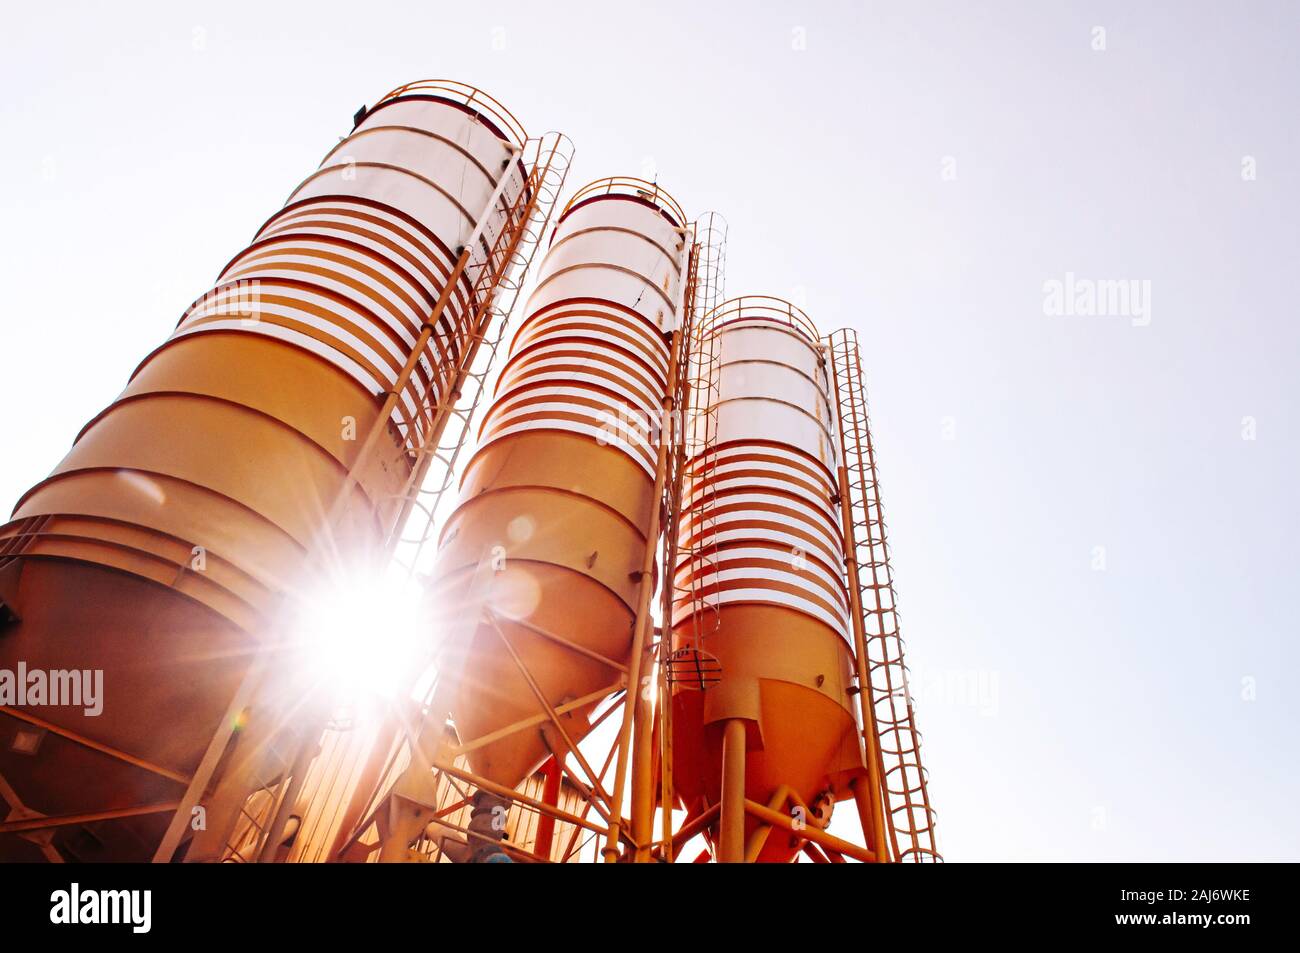 Cement silos of Cement batching plant factory against evening sun flare with warm clear sky Stock Photo